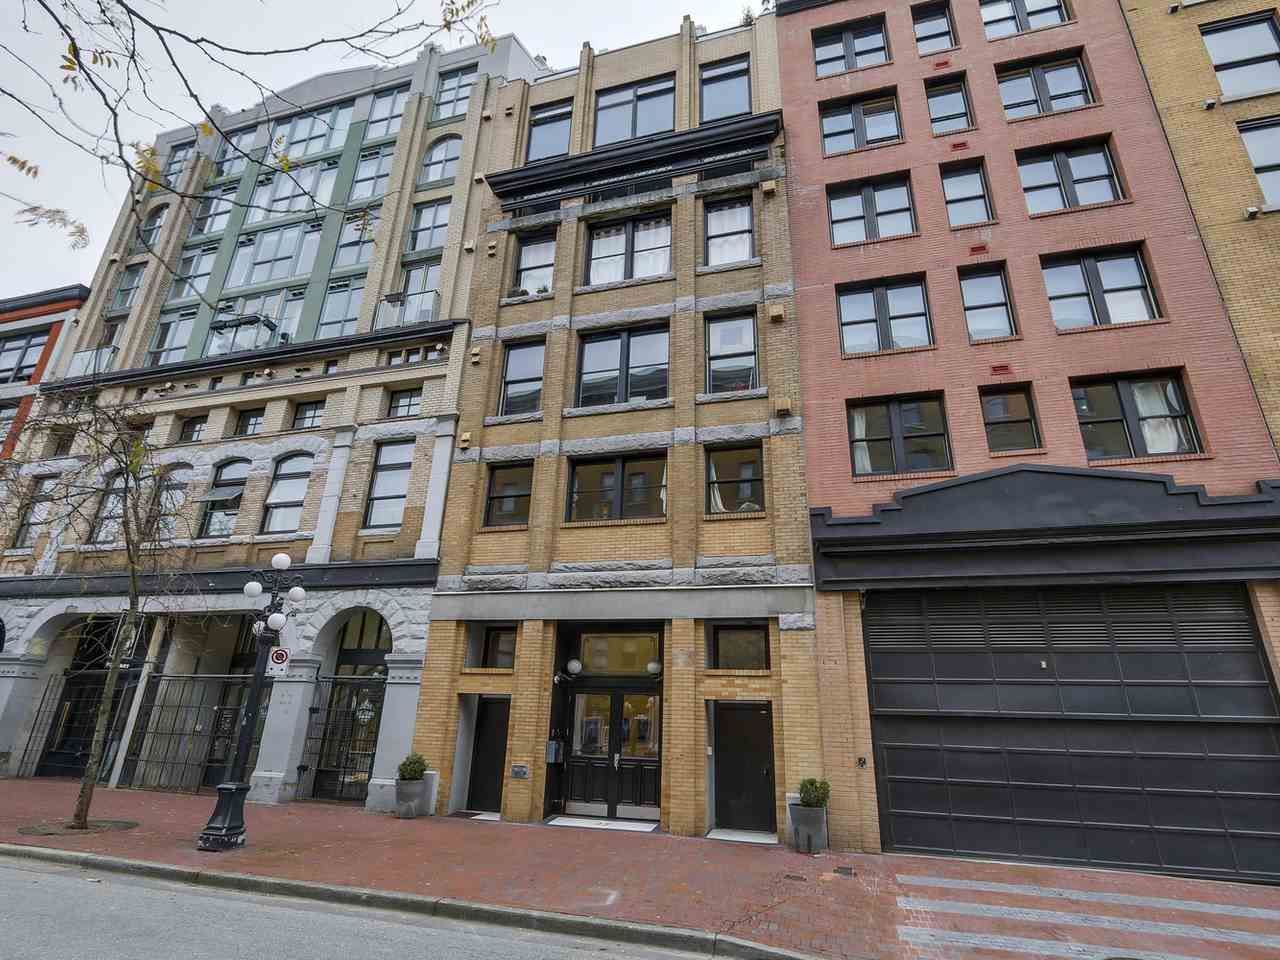 Main Photo: 710 27 ALEXANDER STREET in Vancouver: Downtown VE Condo for sale (Vancouver East)  : MLS®# R2124428